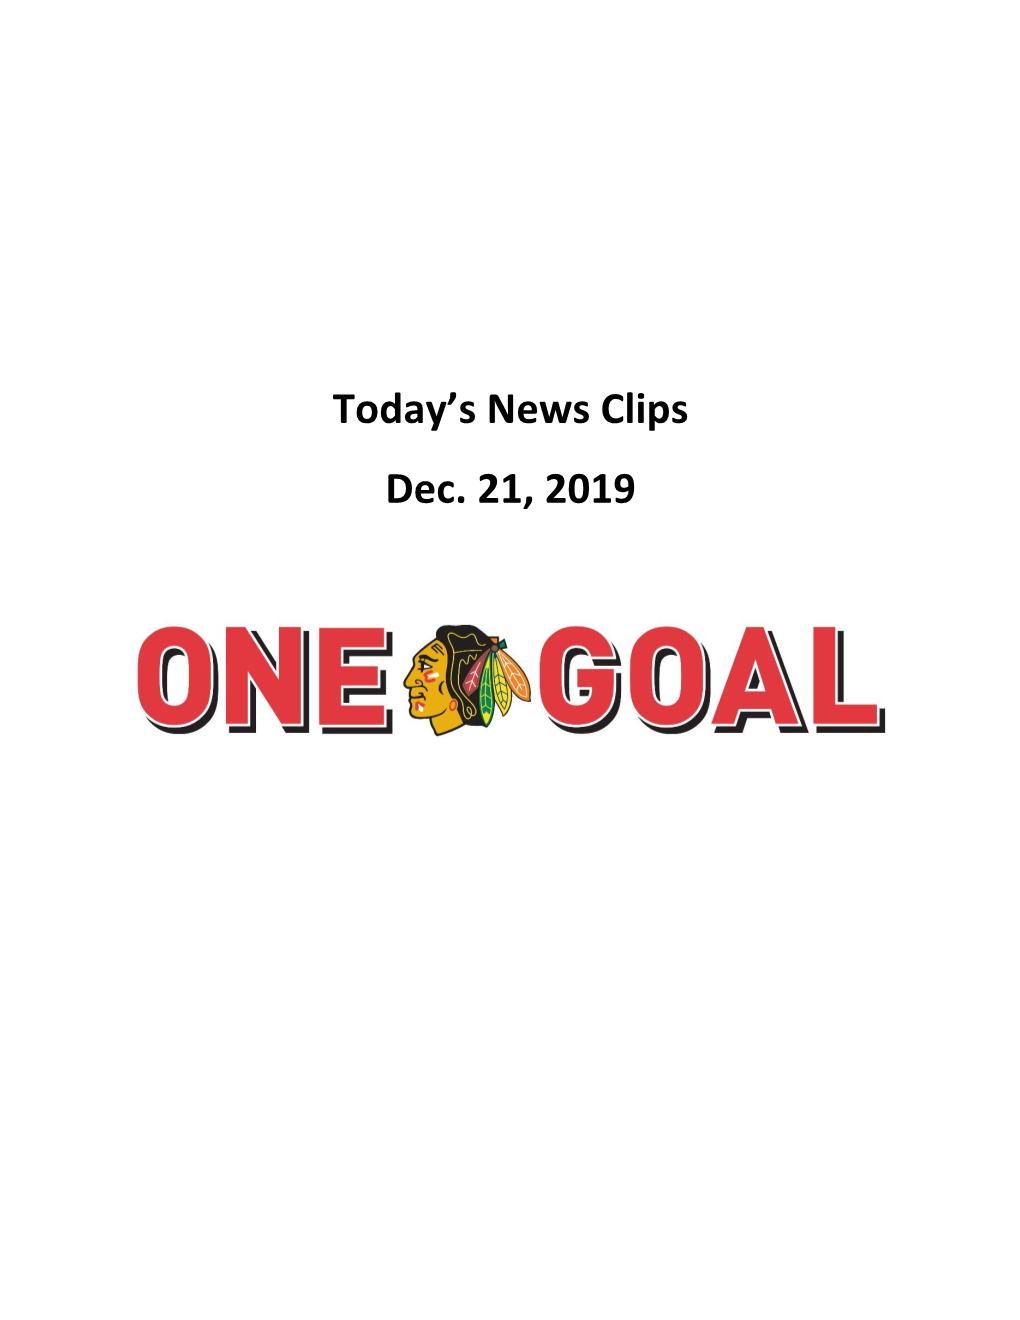 Today's News Clips Dec. 21, 2019